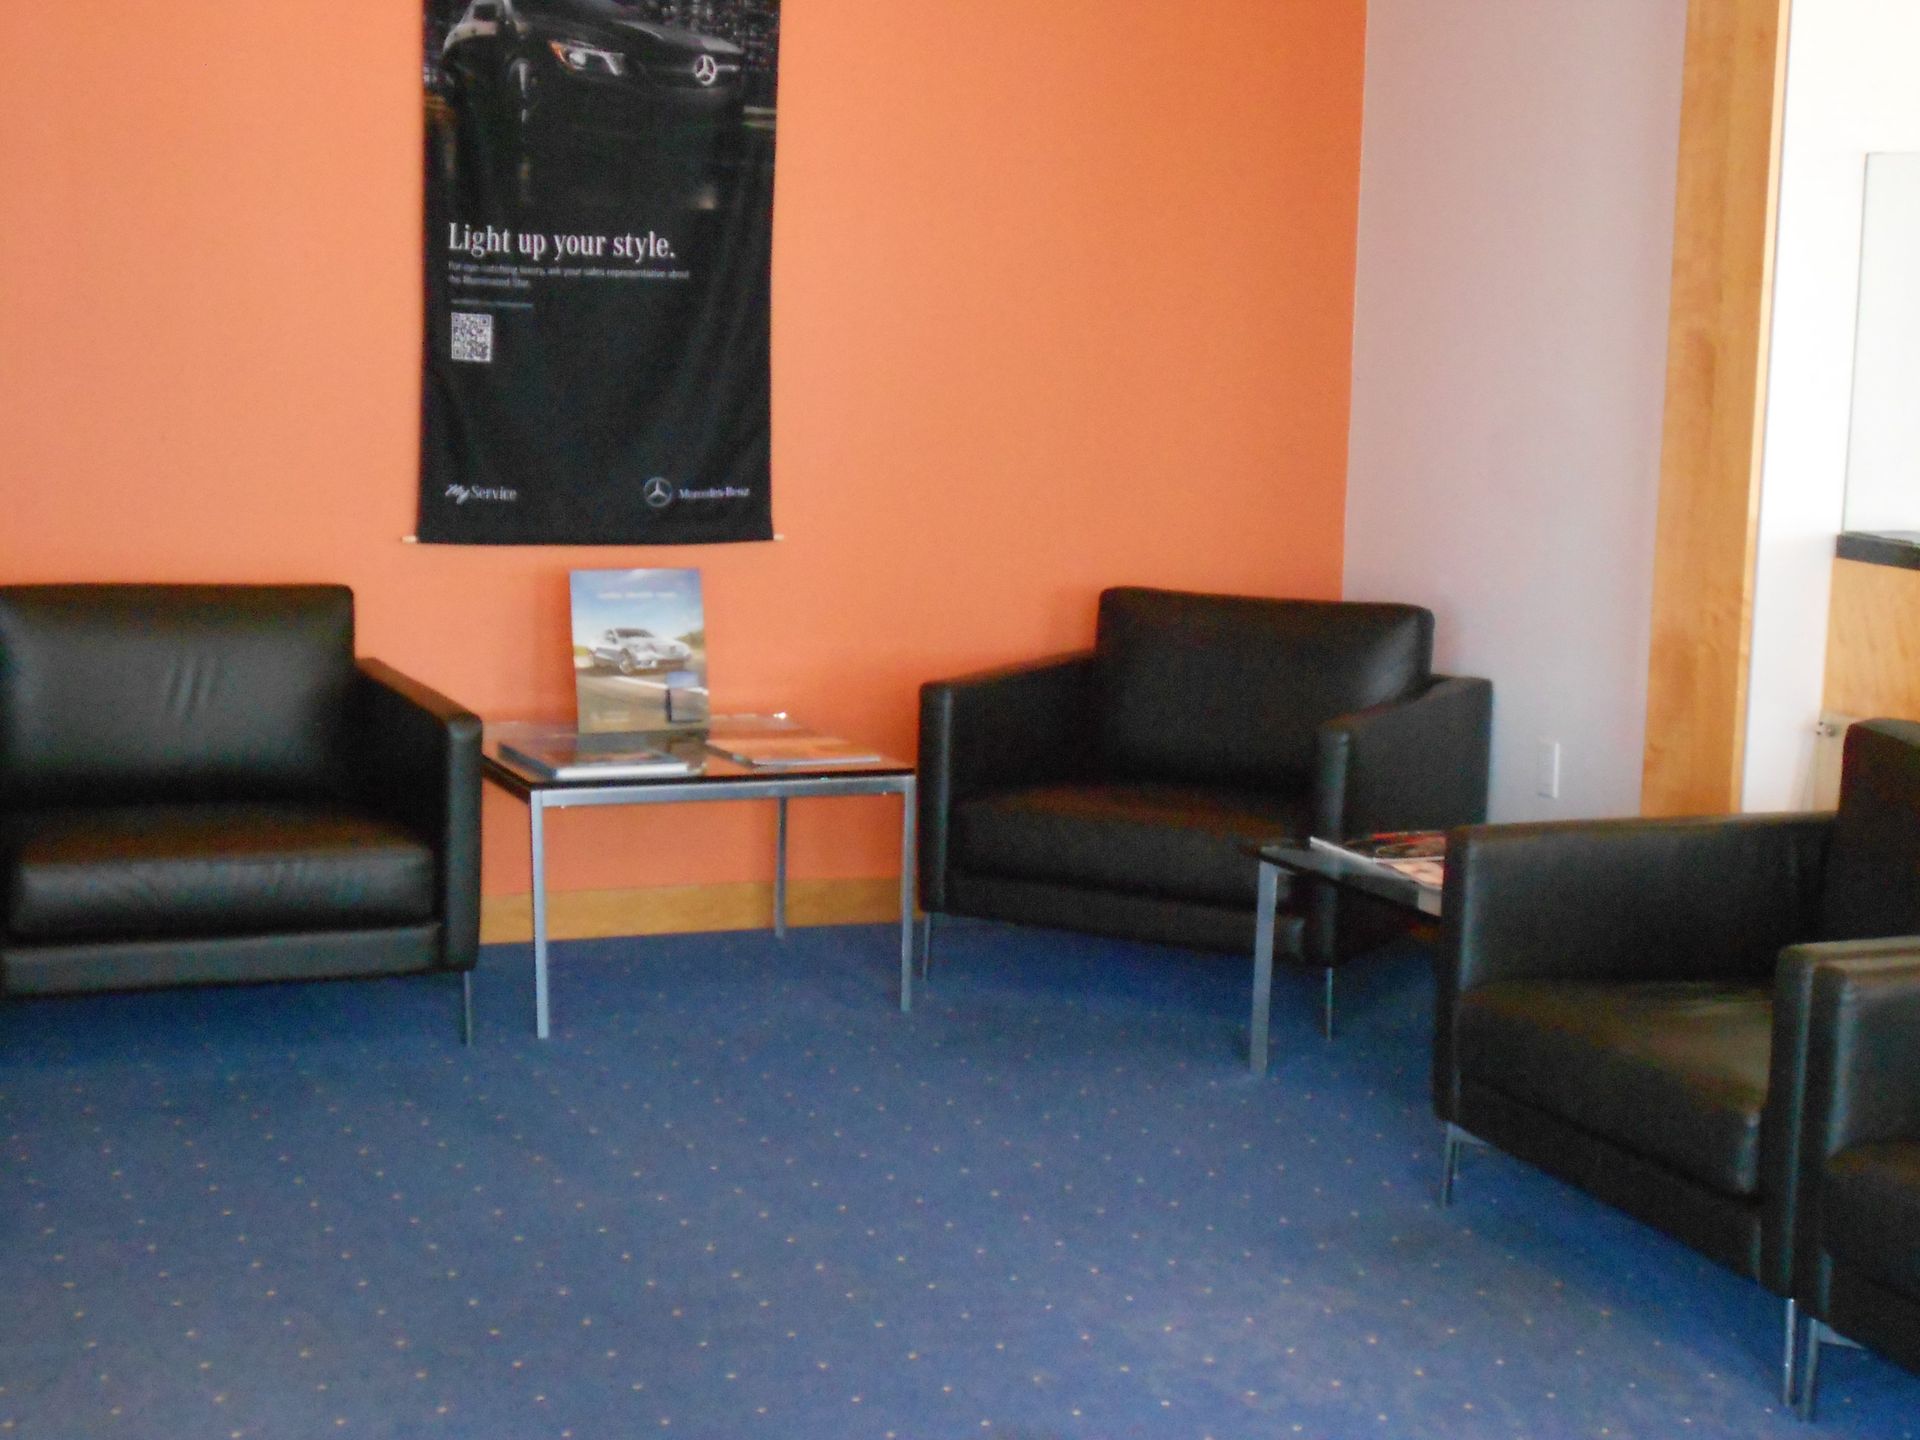 Carpet cleaning in a waiting room